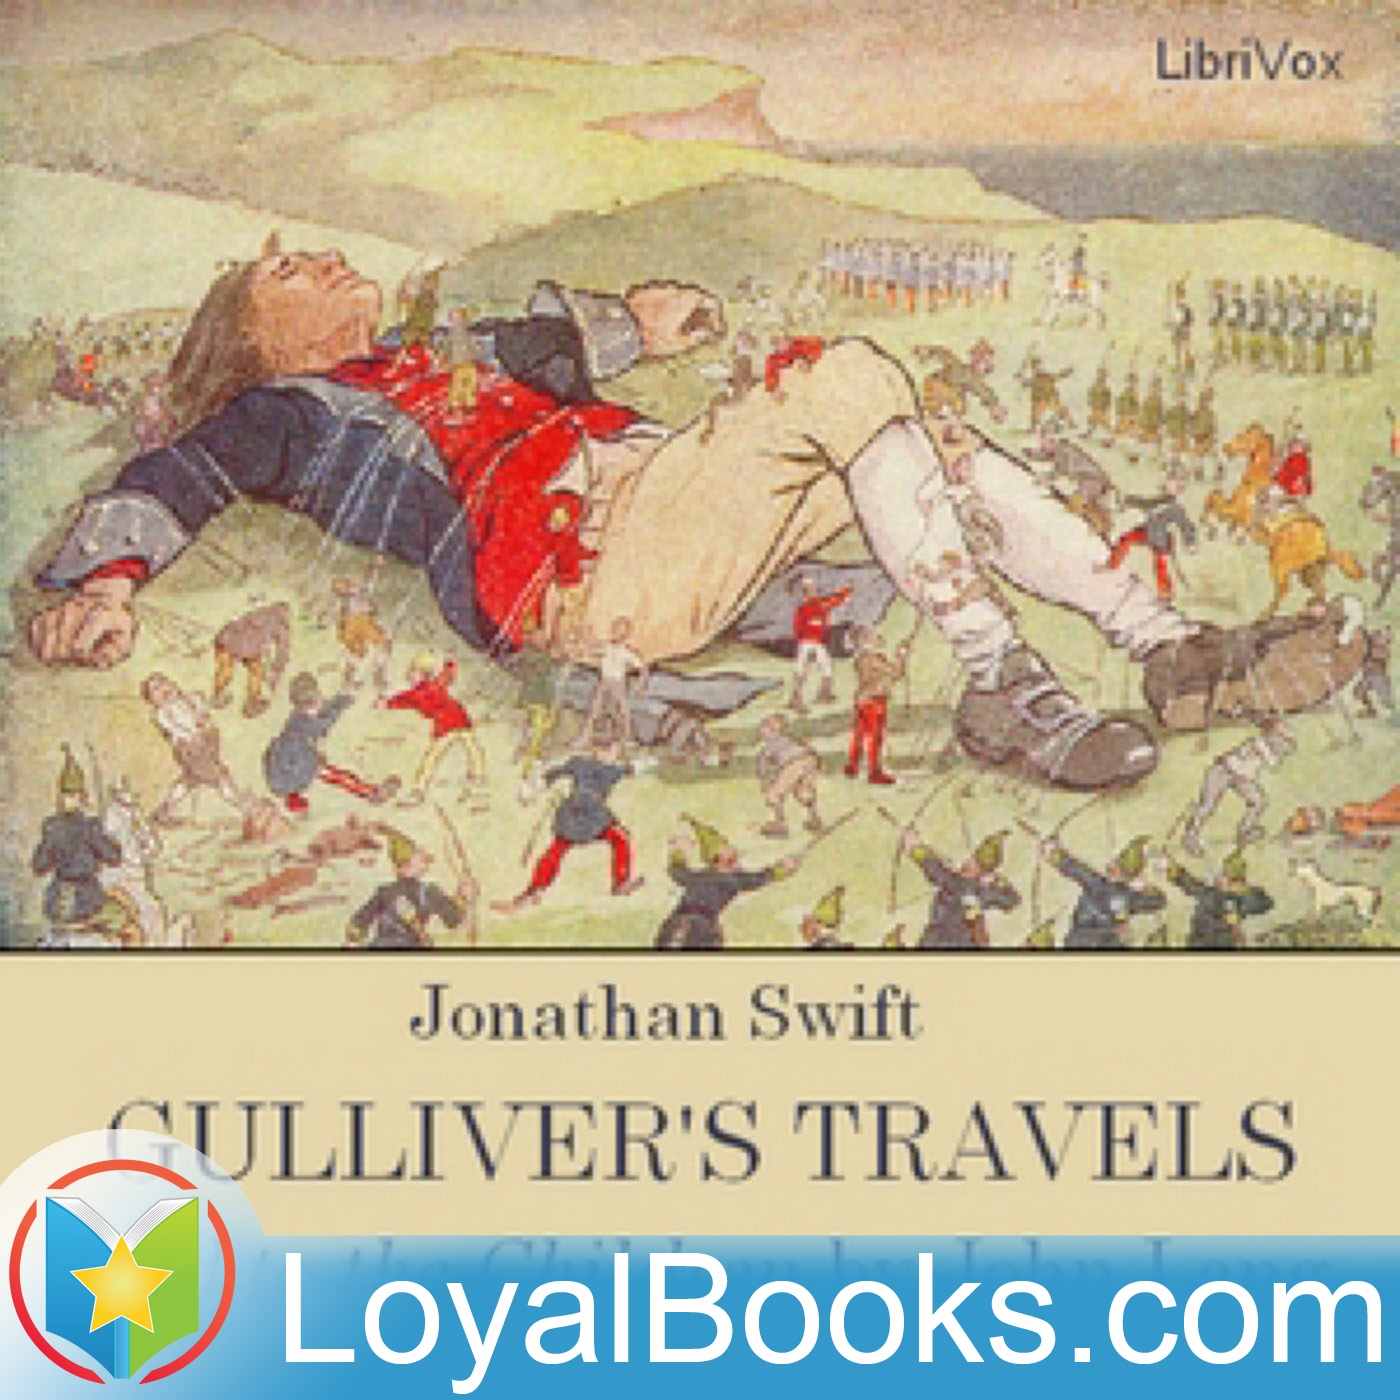 Gulliver's Travels, Told to the Children by John Lang